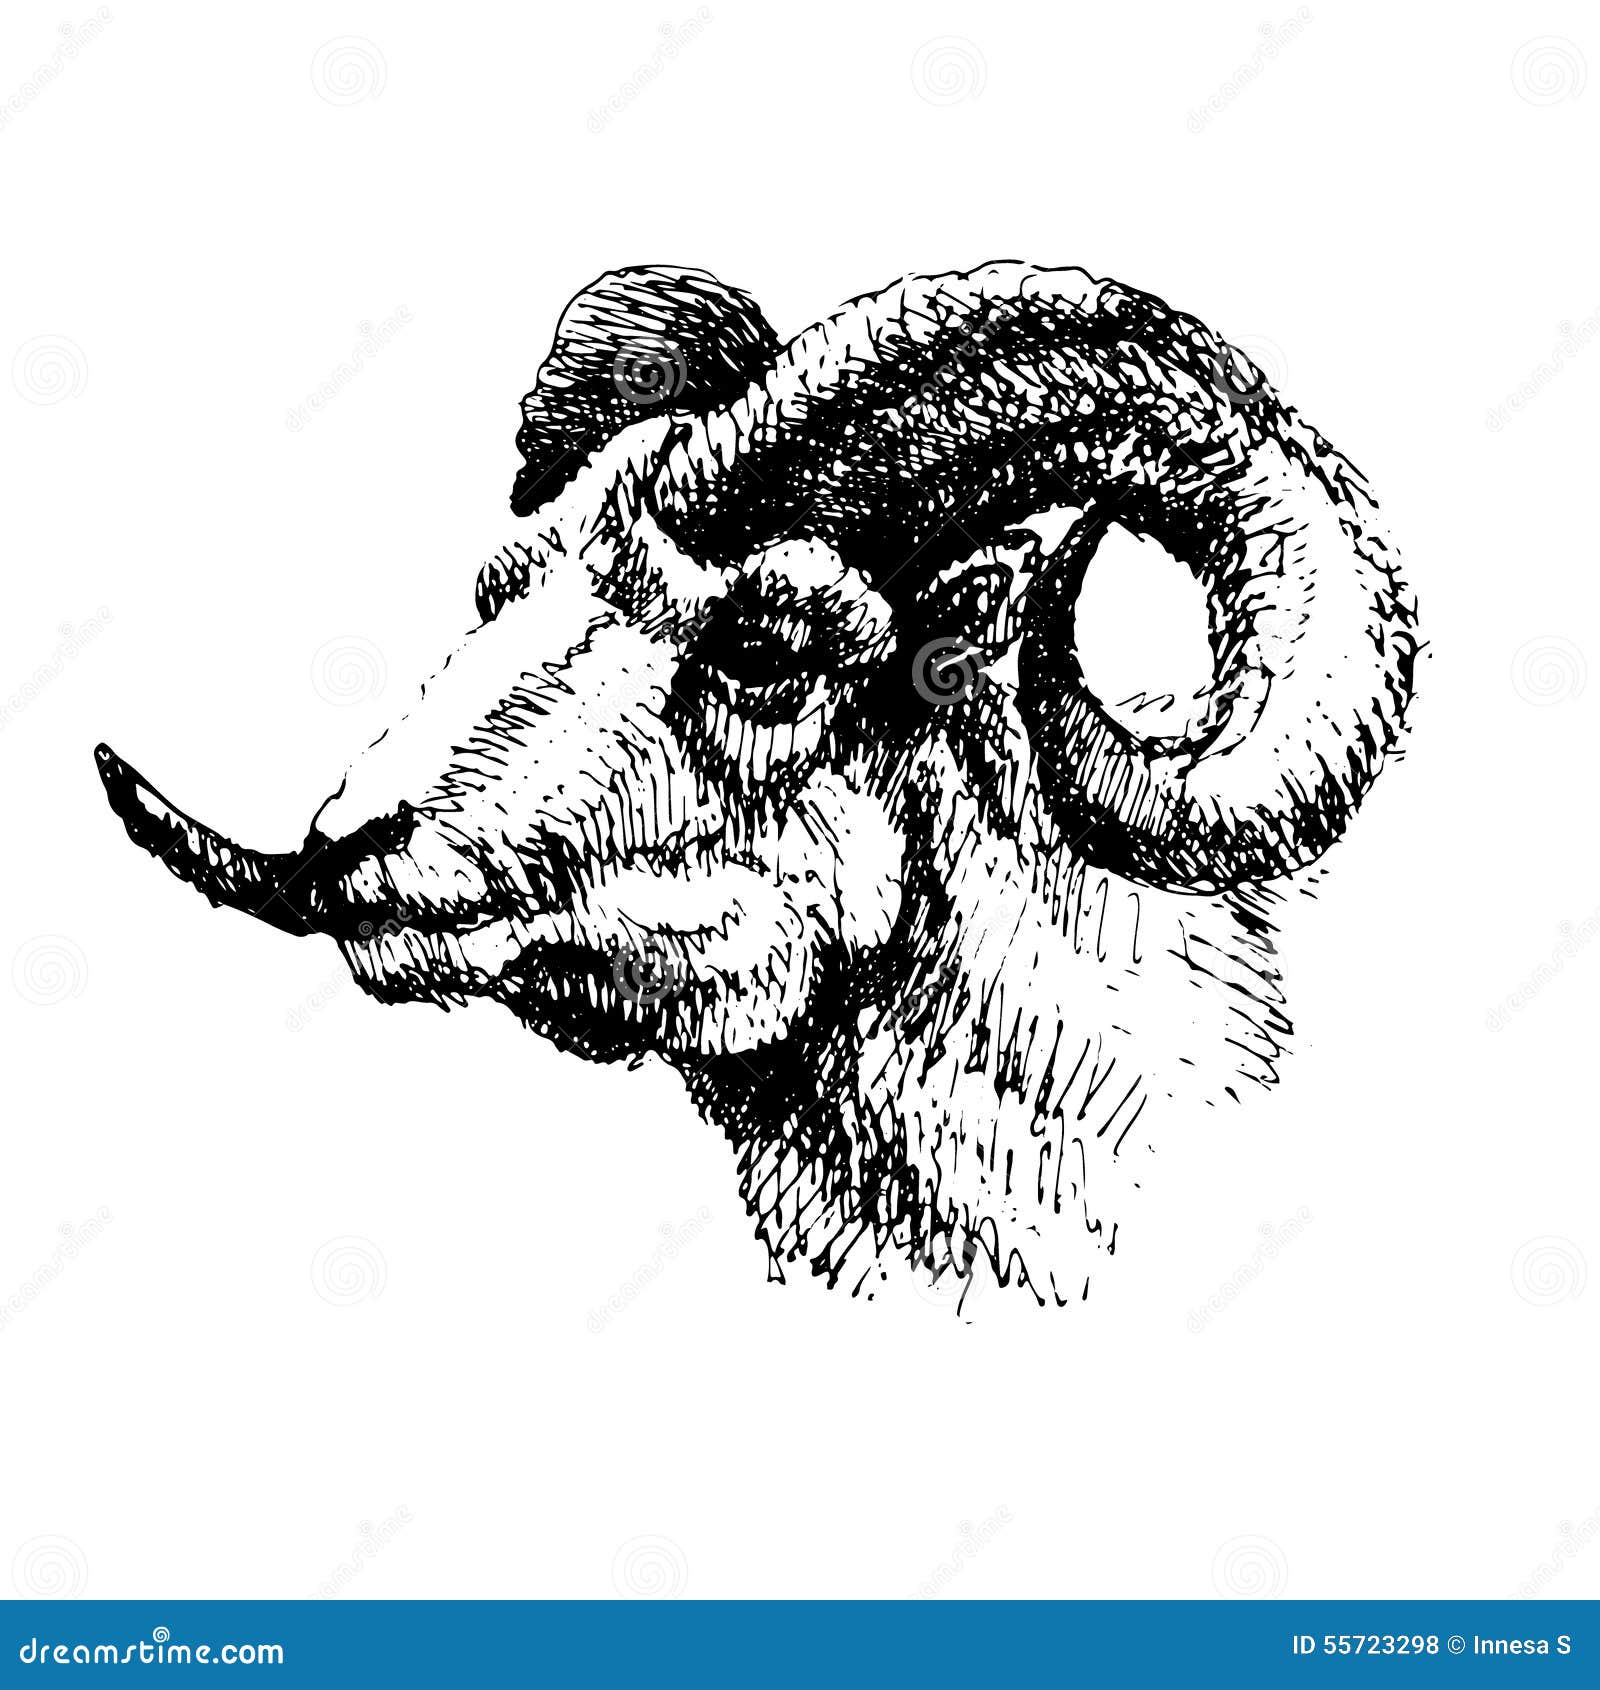 Mutton, Sheep, Hand Graphic, Black and White Stock Vector ...